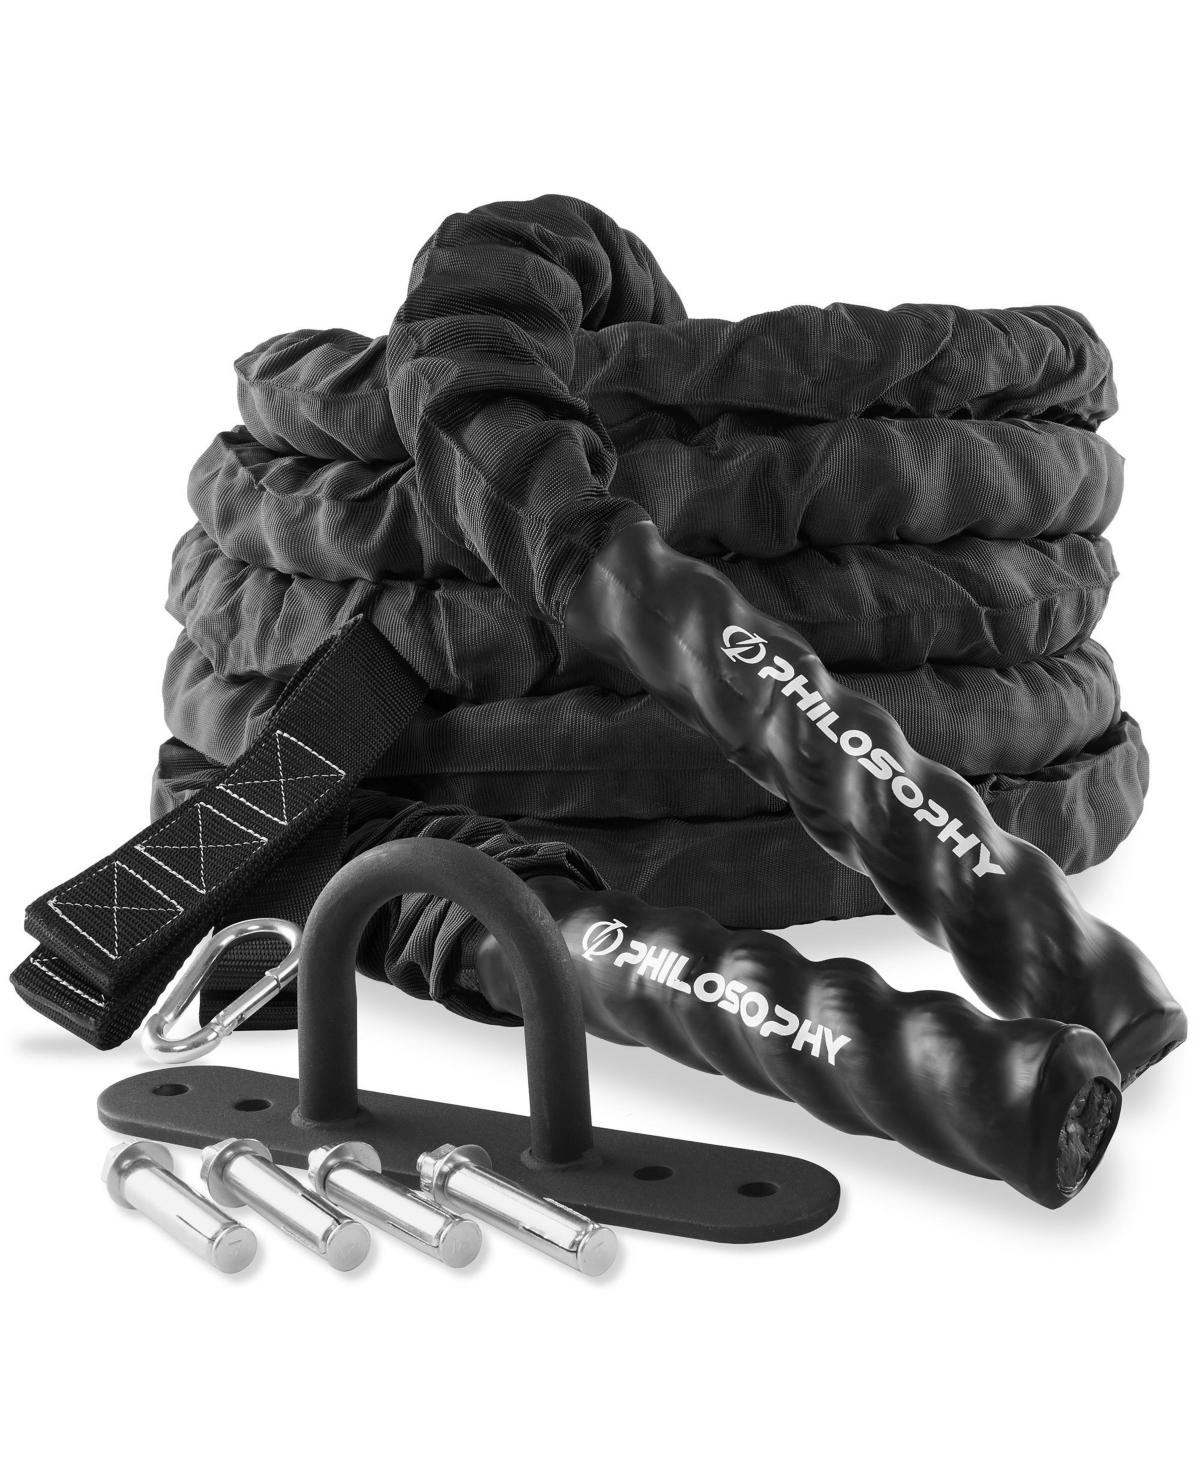 30 Foot Exercise Battle Rope 2 Inch Diameter with Cover and Anchor Kit - Black